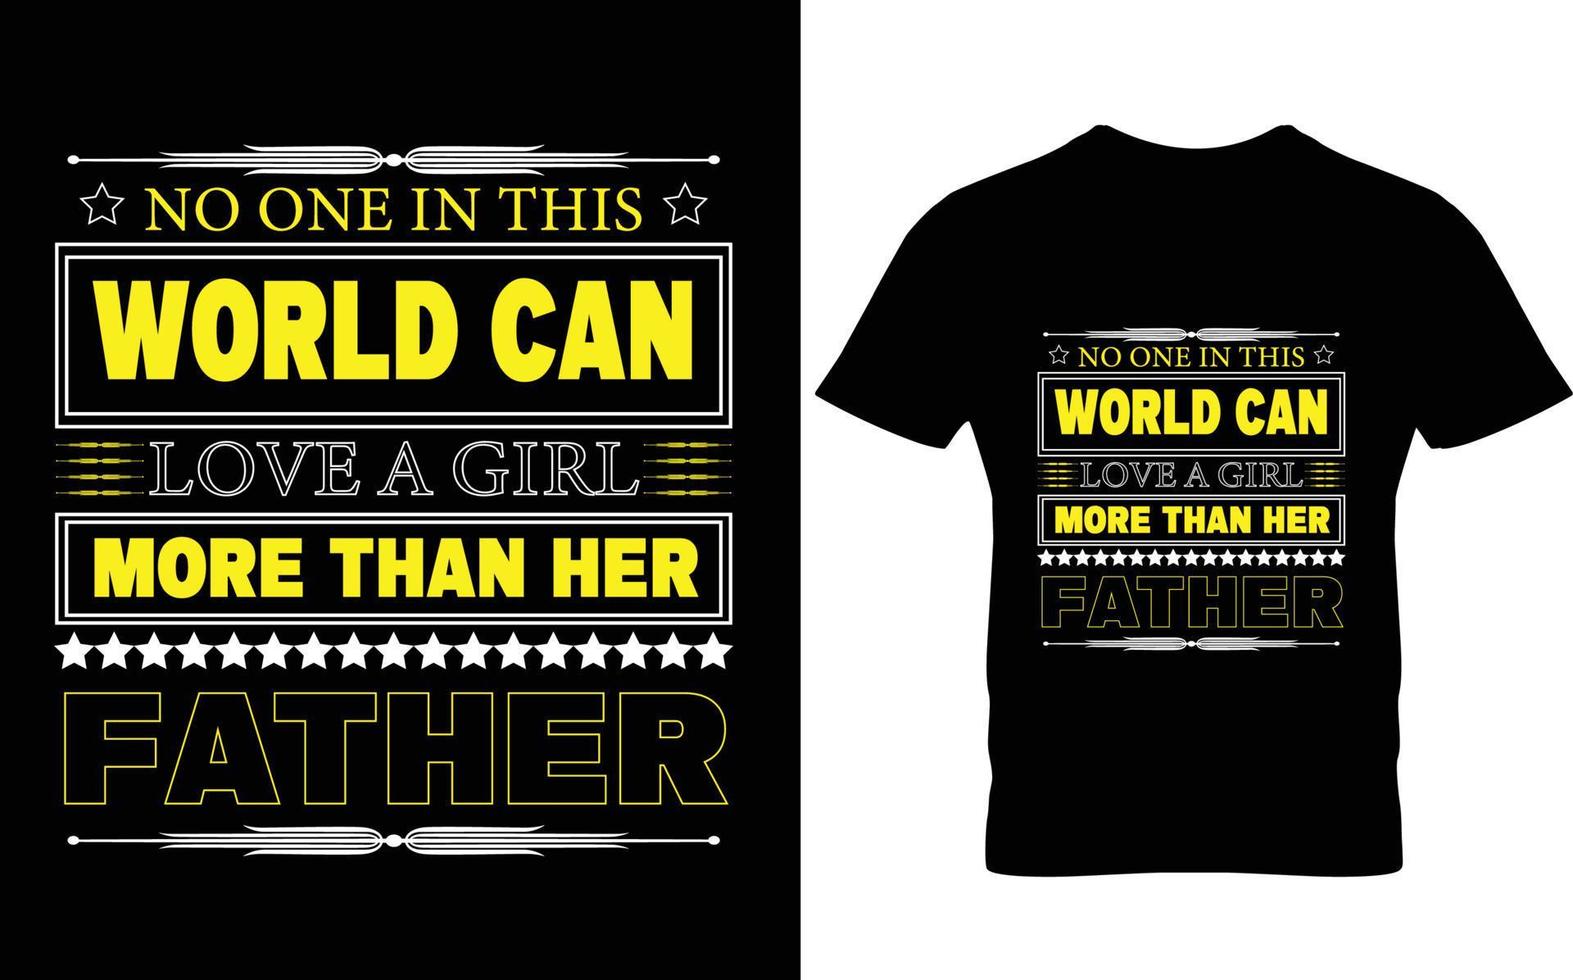 No one in this world can love a girl more than her father tshirt design vector